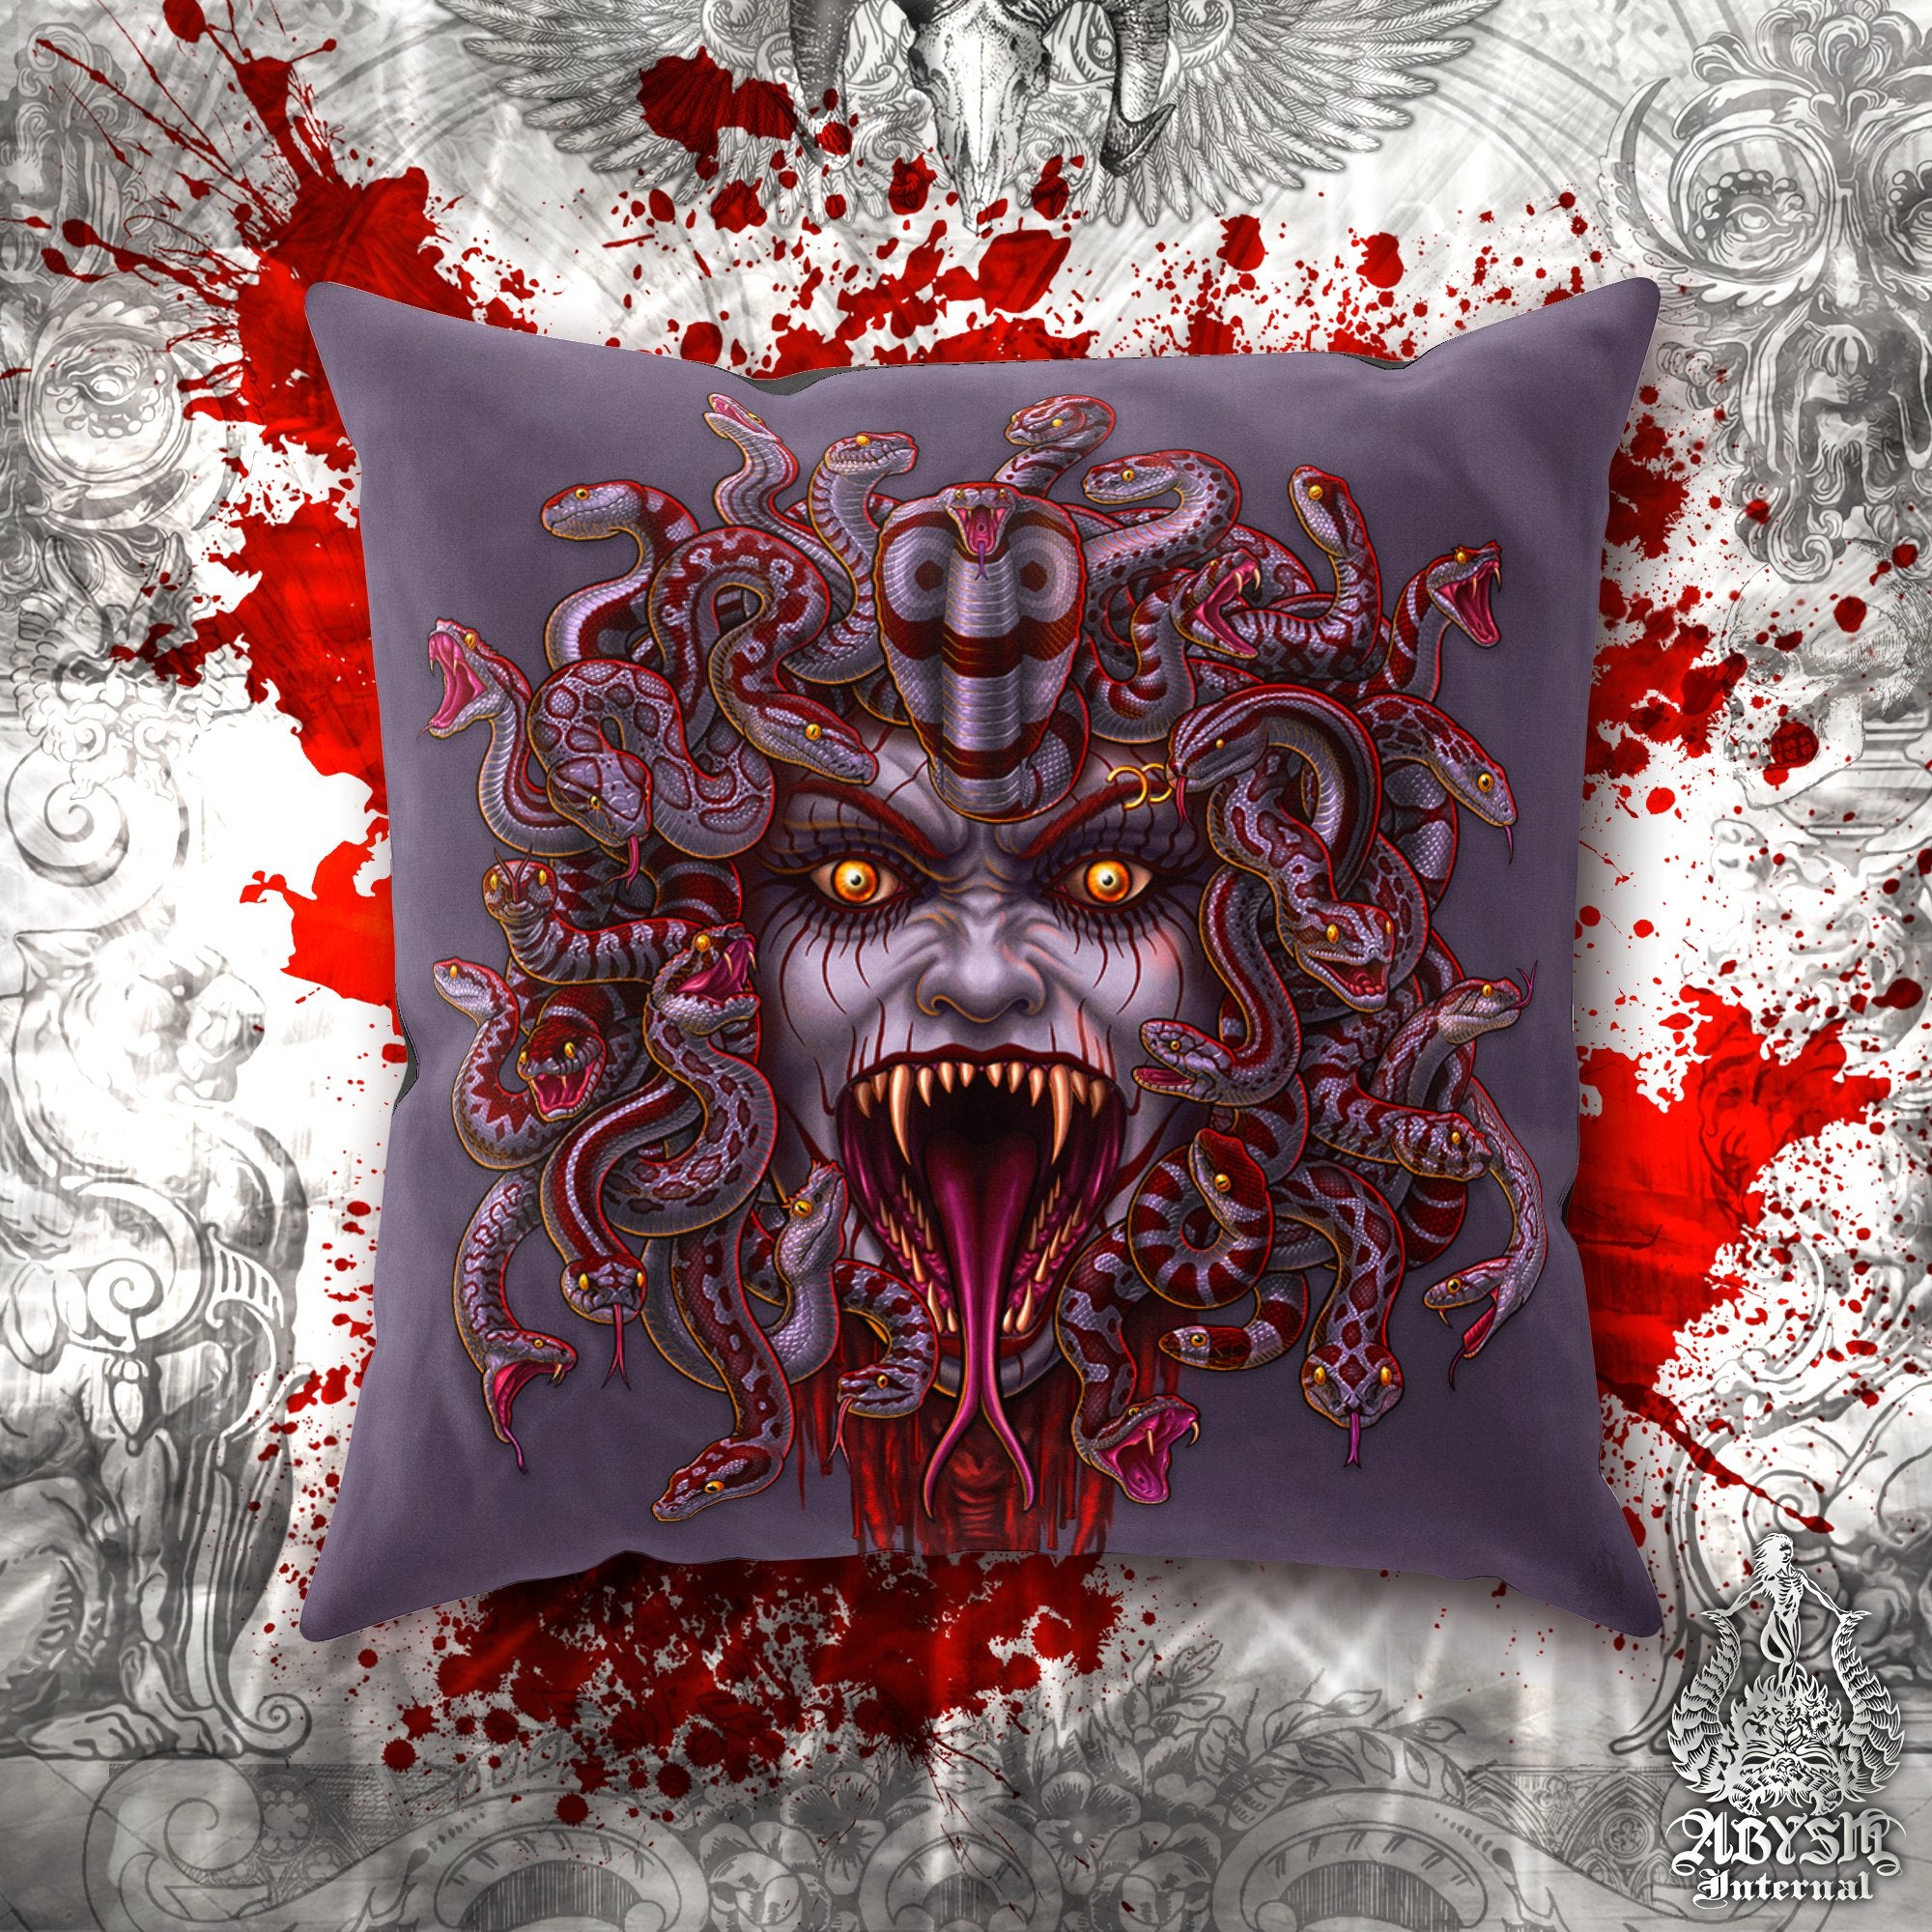 Medusa Throw Pillow, Decorative Accent Pillow, Square Cushion Cover, Gamer Room Decor, Goth Snakes Art, Alternative Home - Grey, Bloody Ash, 3 Faces - Abysm Internal